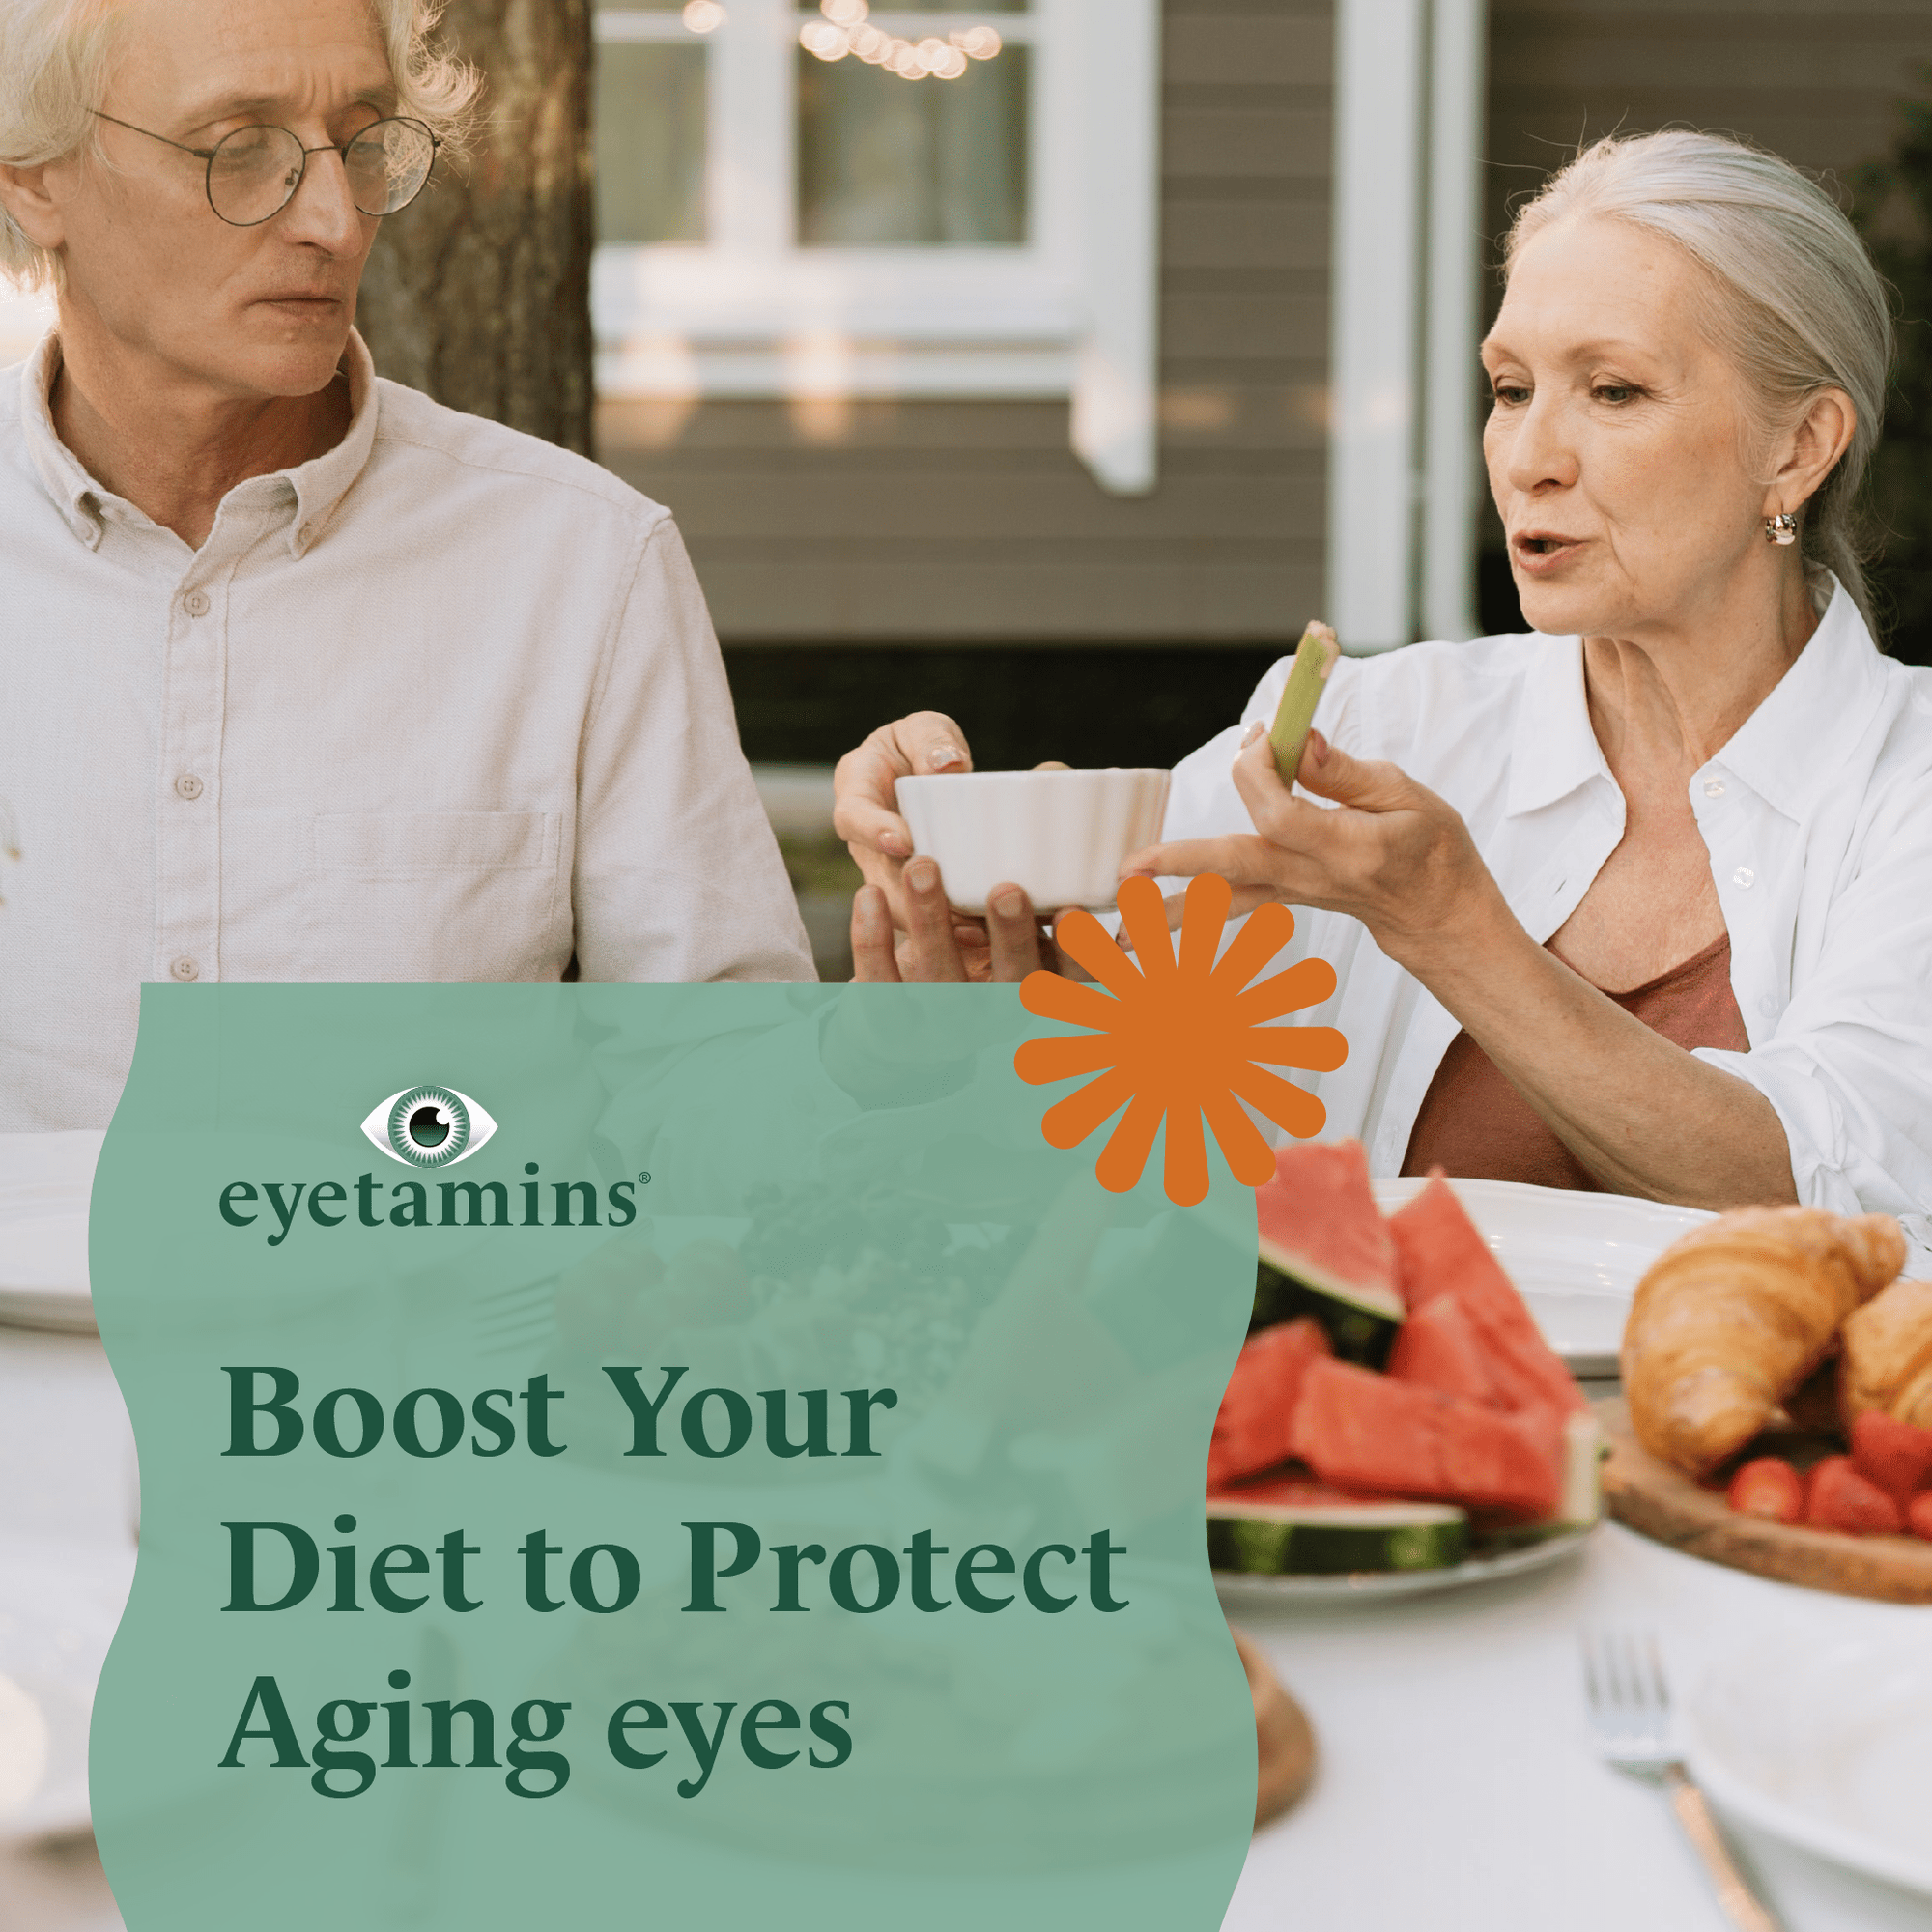 Eyetamins - Boost Your Diet to Protect Aging eyes